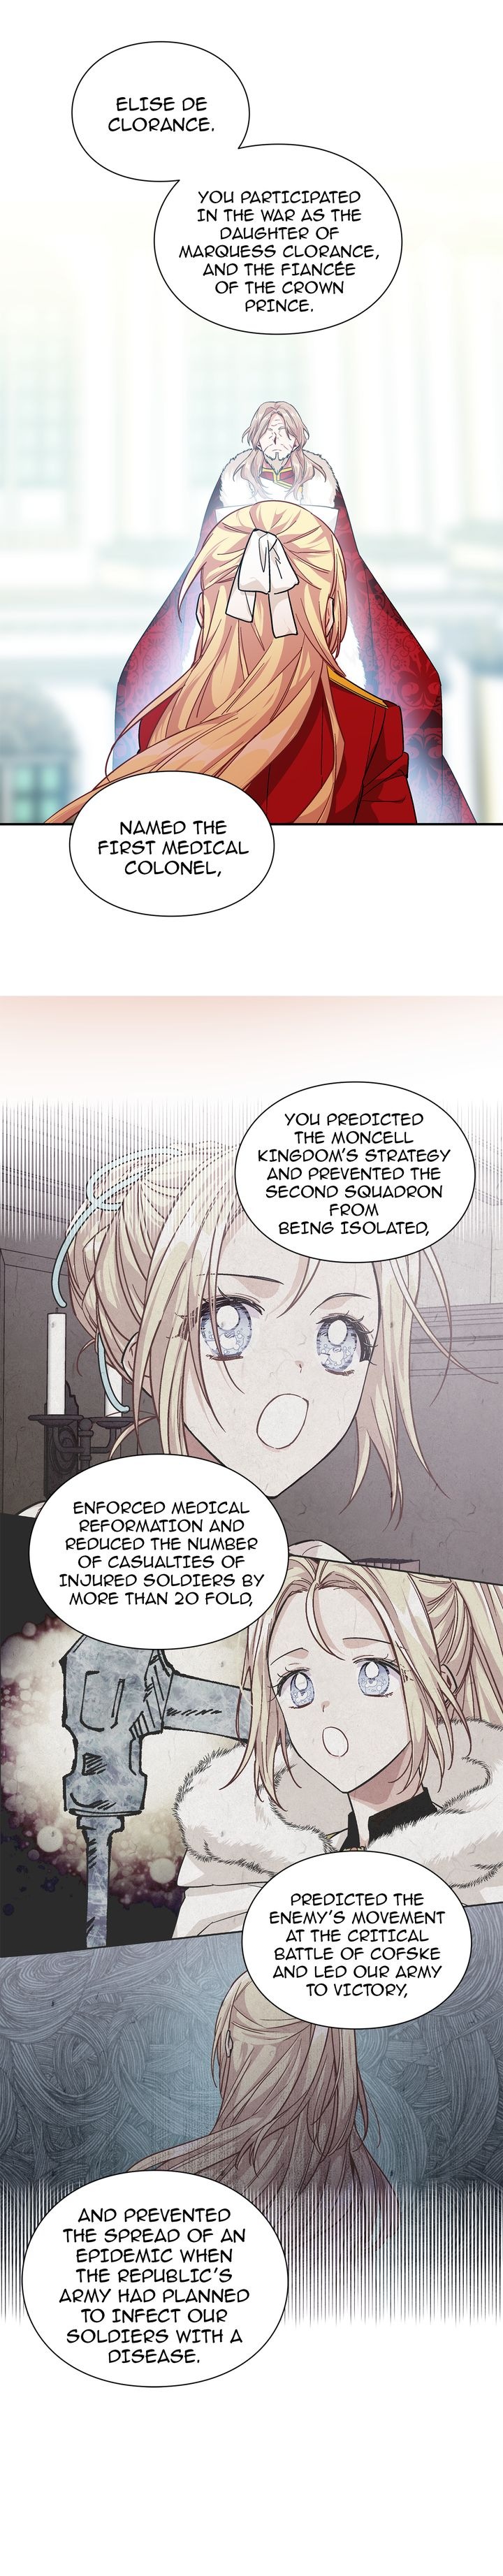 Doctor Elise – The Royal Lady with the Lamp - Chapter 101 Page 19